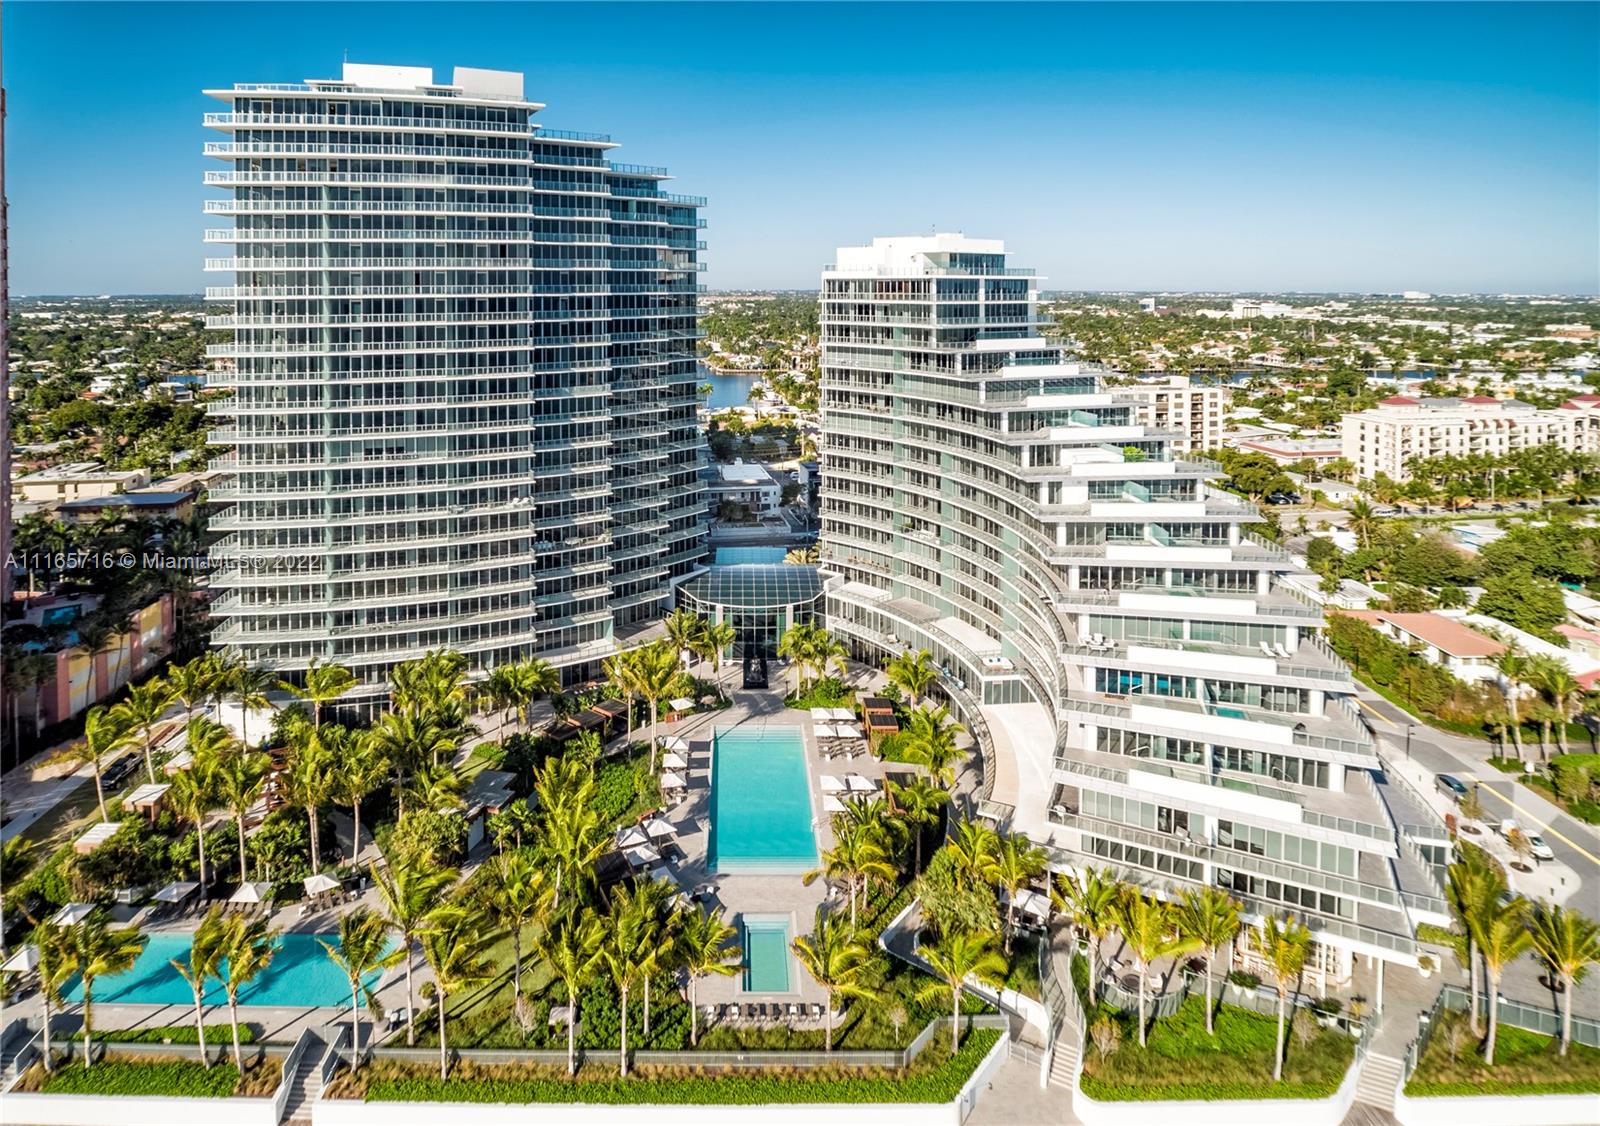 EXTREMELY RARE MAGNIFICENT TOP TWO STORY PENTHOUSE (NORTH 1701) OFFERING A FULL FLOOR OF 5,000 SF & 360 DEGREES OF OCEAN, INTRACOASTAL & CITY VIEWS WITH 3,766 SF TERRACES WHICH WRAPS AROUND THE RESIDENCE. EXPERIENCE A LUXURIOUS TURNEY RESIDENCE WITH EXPECTIONAL FINISHES THROUGHOUT. COMPLETELY RE-DESIGNED FLOOR PLAN WHICH HAS BEEN EXTENSIVELY ENCHANCED TO FEATURE 5 ENSUITE BEDROOMS, GREAT ROOM, BAR, DINING ROOM, INCREDIBLE KITCHEN, OFFICE, 2ND FLOOR SUNROOM, PRIVATE SPLASH POOL, CABANA AND SOPHISTICATED FINISHES IMPORTED FROM OUT OF THE COUNTRY. COME AND WALK THROUGH THIS MASTER PIECE WITHIN THE NEWEST DEVELOPMENT, AUBERGE BEACH DIRECT ON THE SAND.